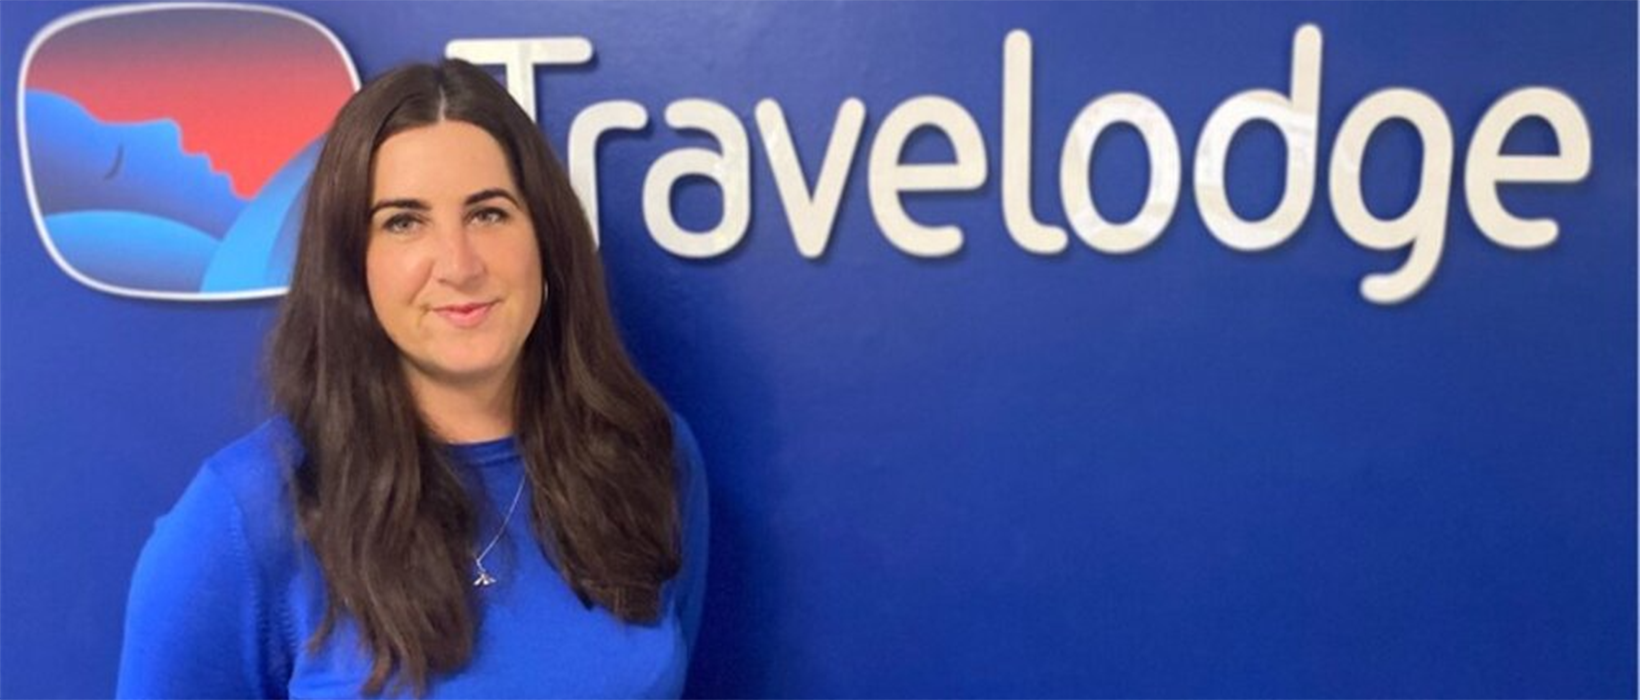 Kirsty Berry promoted to head of estates at Travelodge